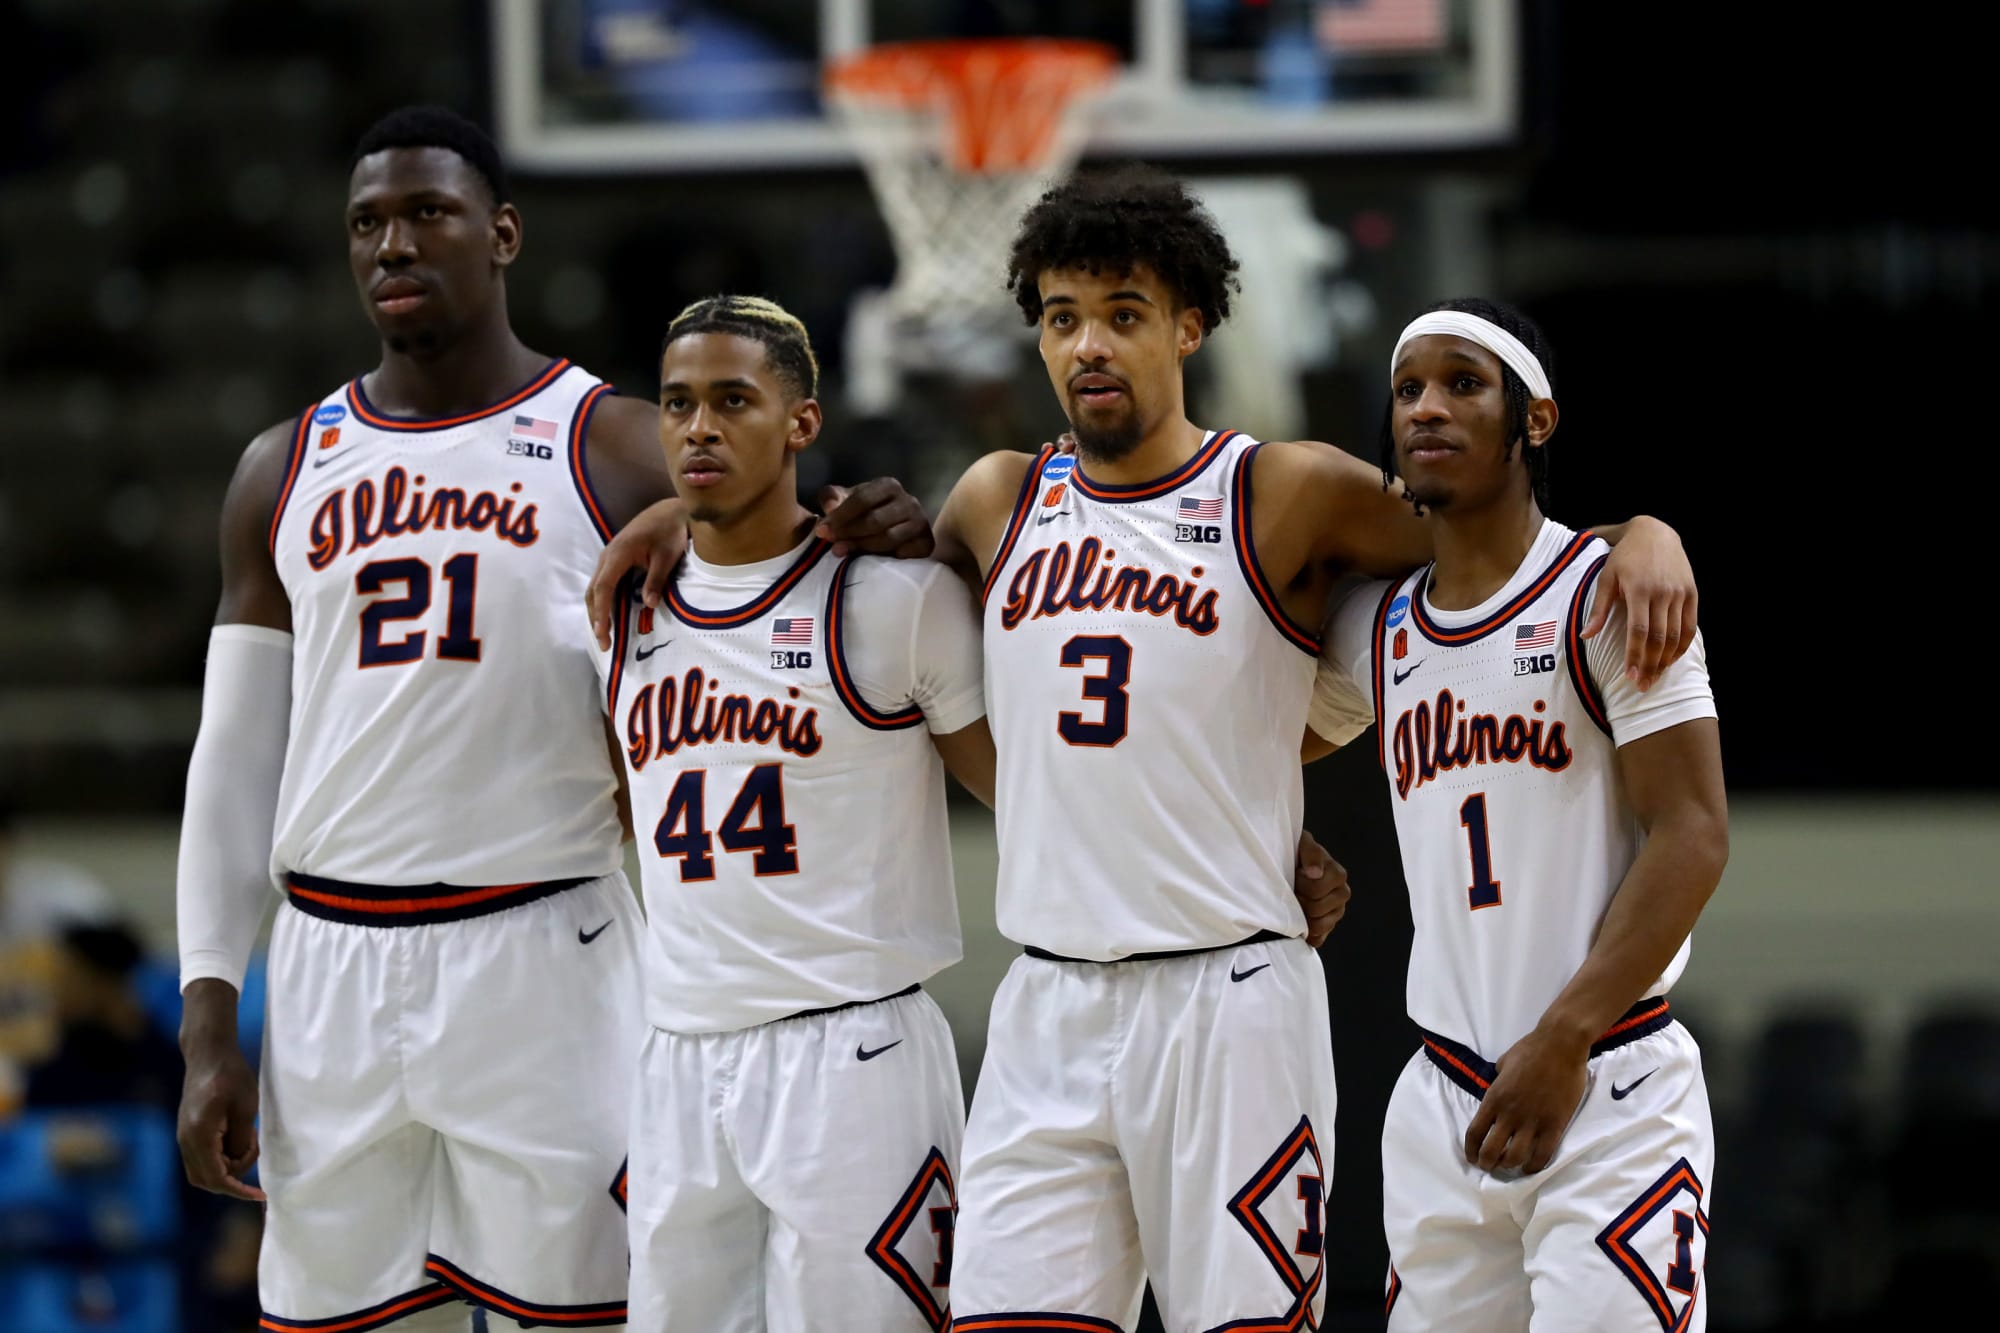 Illinois Fighting Illini Basketball They’re ready for this